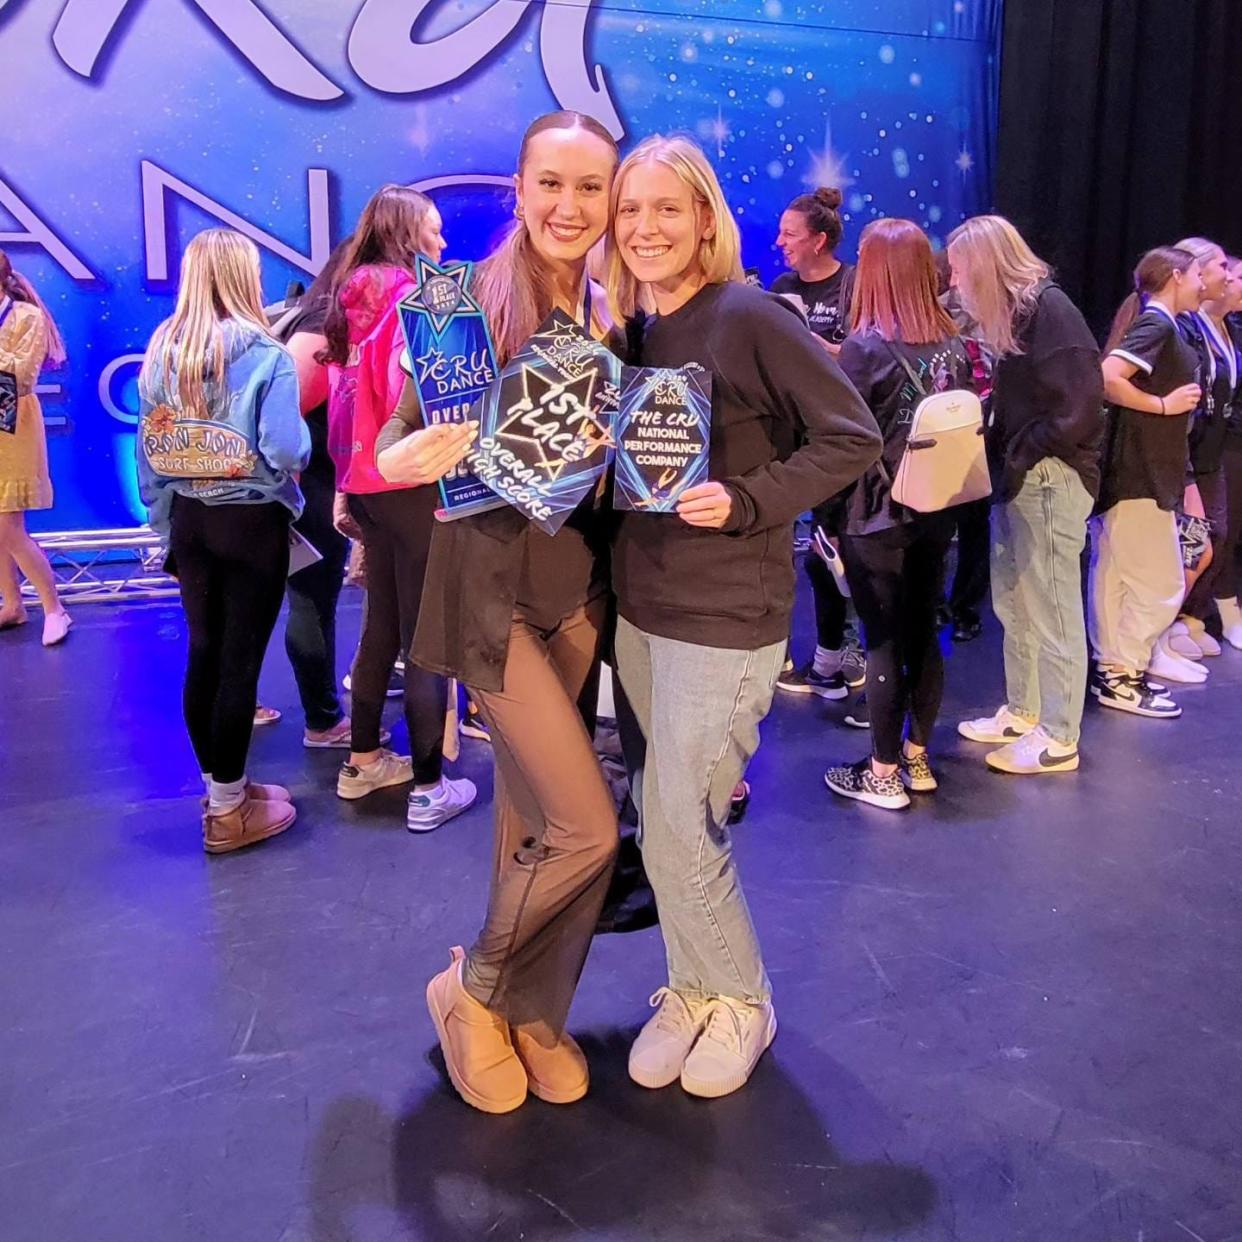 Soloist Rylee Winkel scored big at the CRU Dance Competition that took place April 26-28 at Brighton High School.